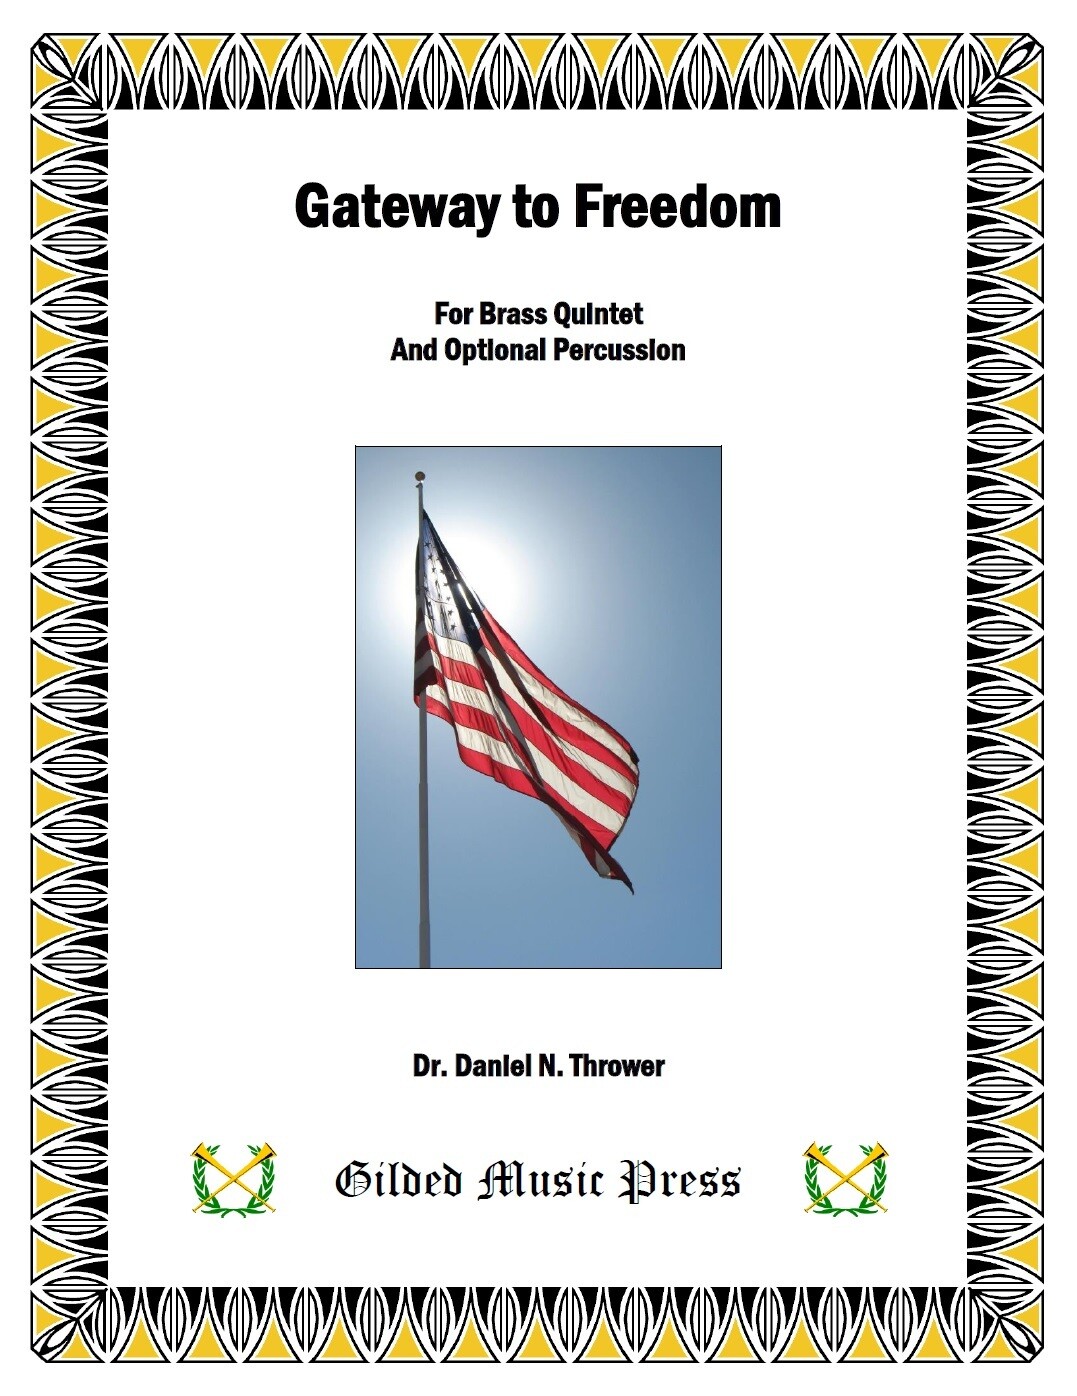 GMP 3005: Gateway to Freedom (Brass Quintet & Optional Percussion), Dr. Daniel Thrower